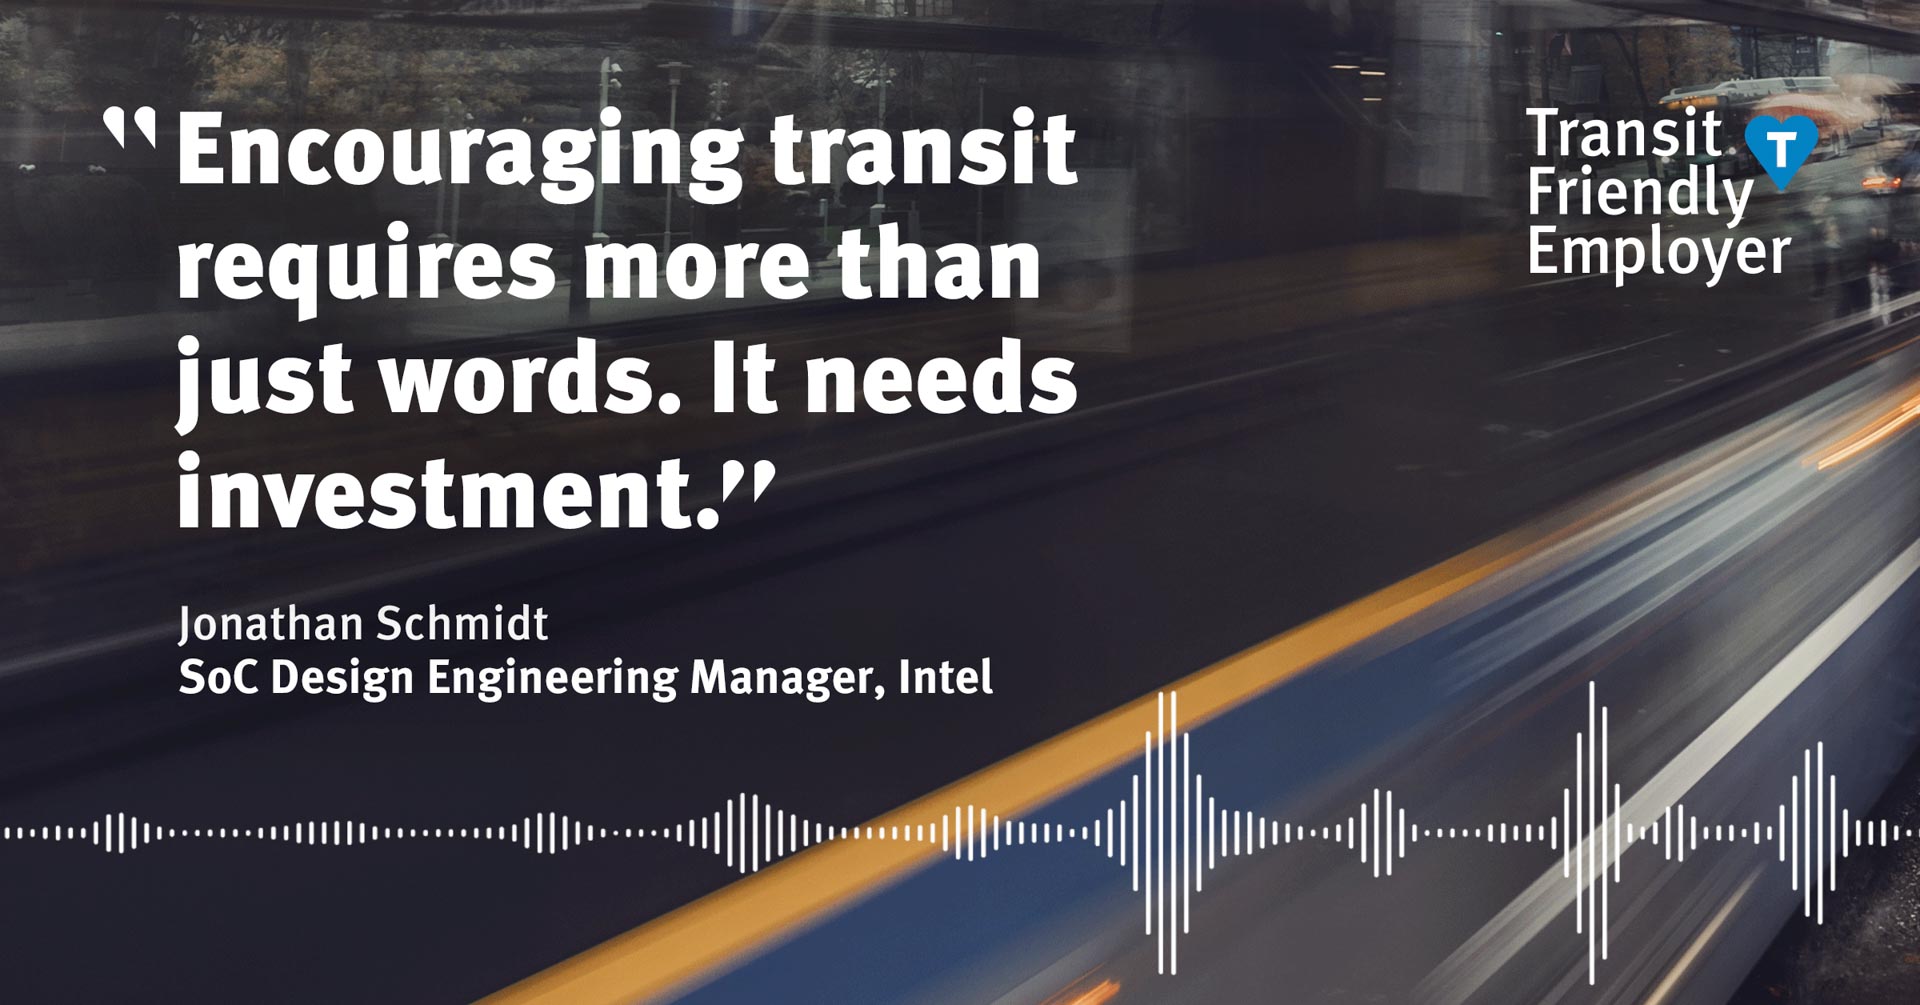 "Encouraging transit requires more than just words. It needs investment." —Jonathan Schmidt, Intel Canada Design Engineering Manager